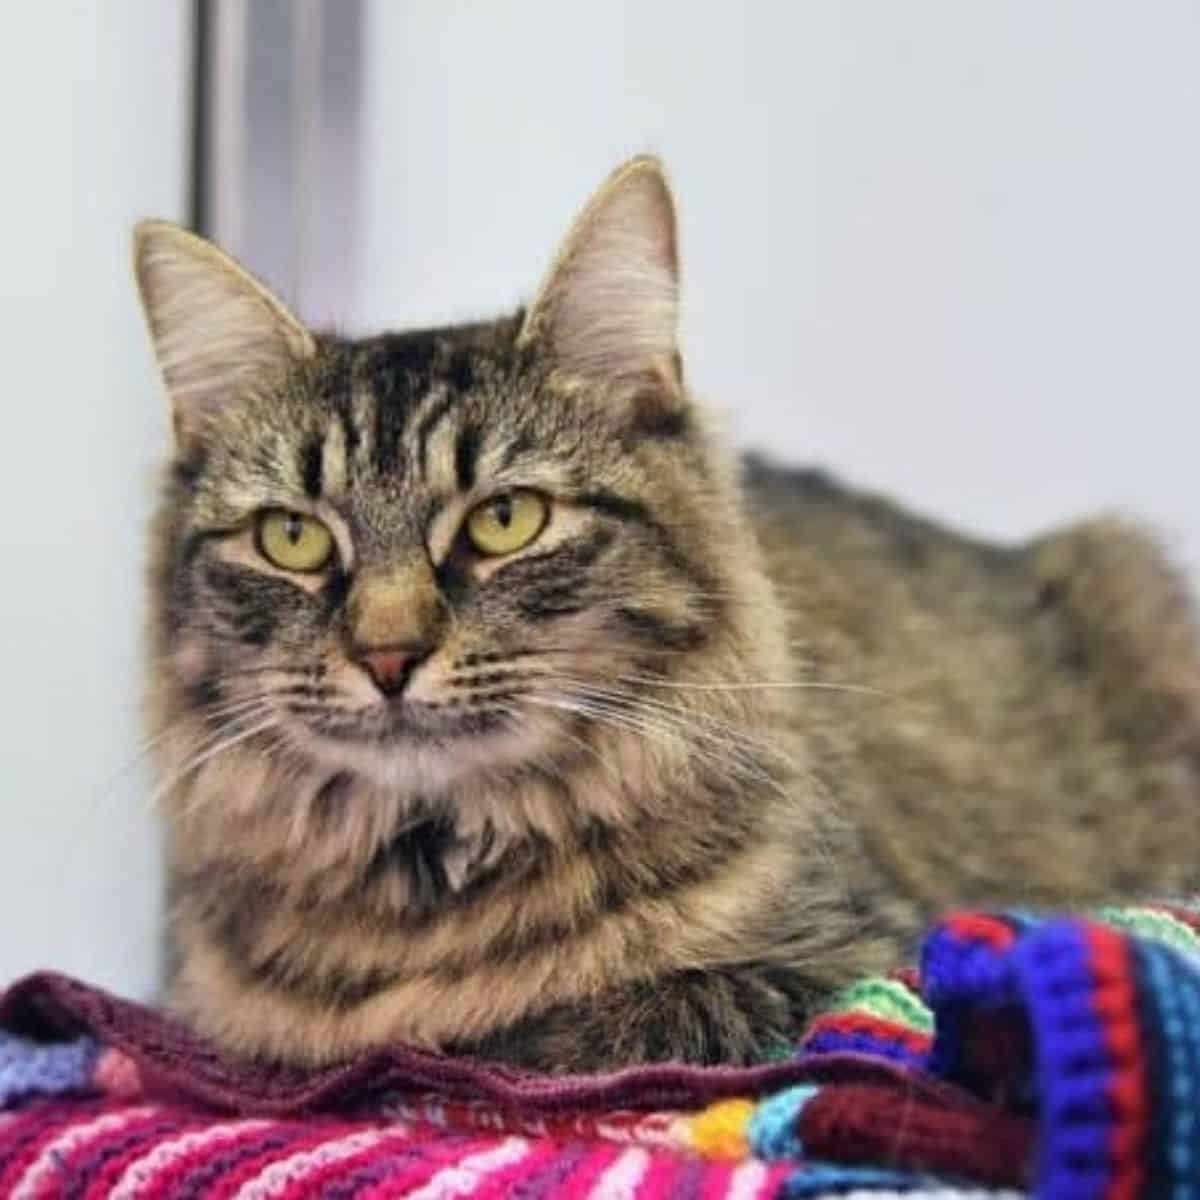 Monique, a shelter cat who had a birthday party